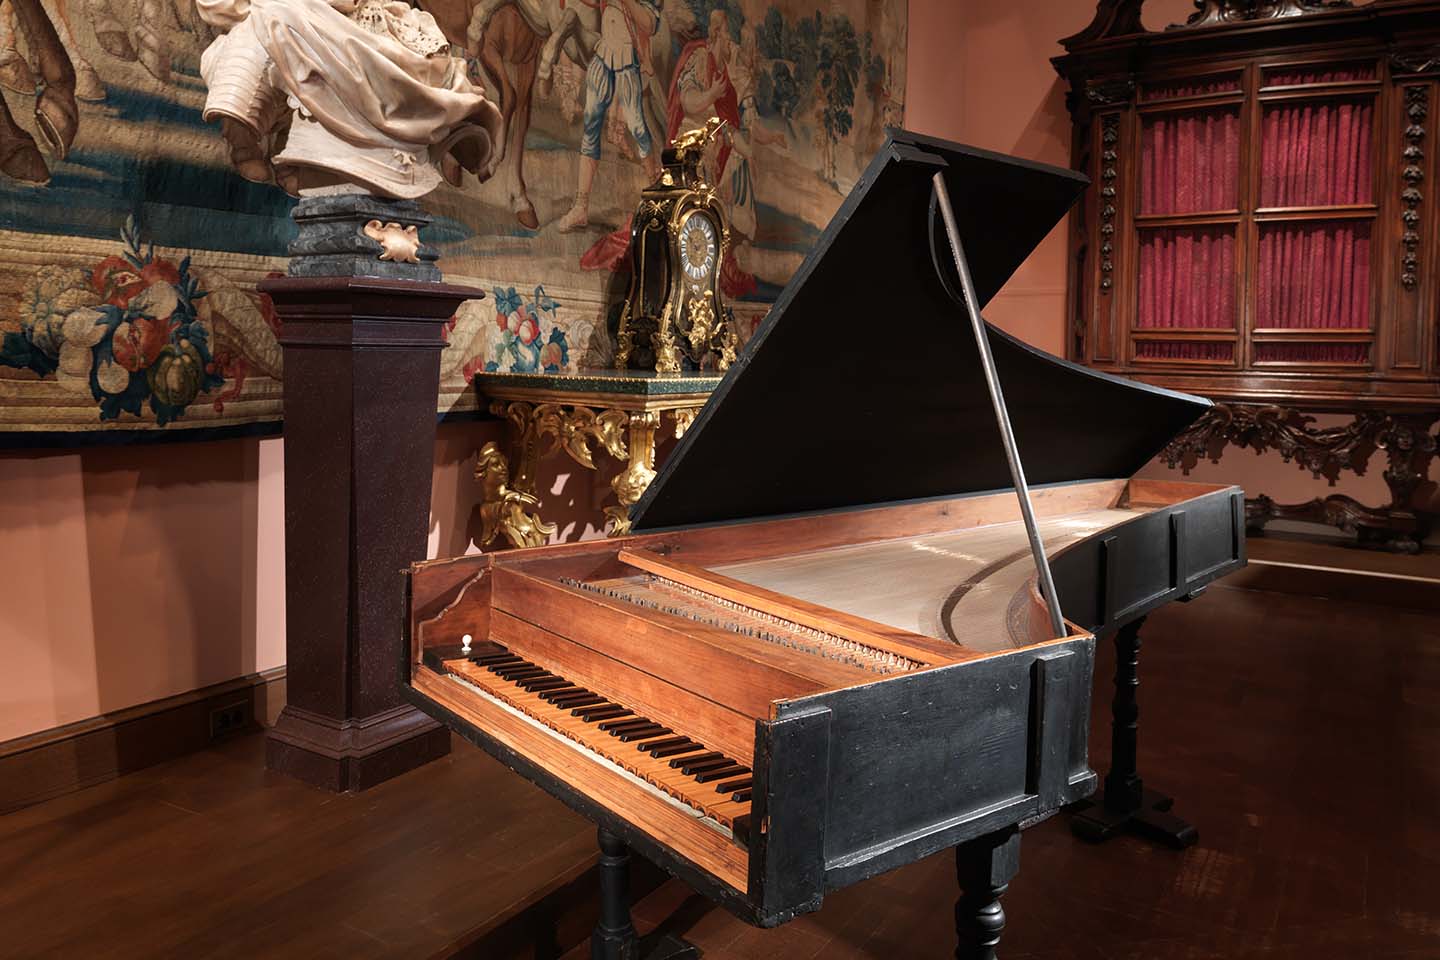 The Cristofori Piano on display in The Met's Musical Instruments galleries